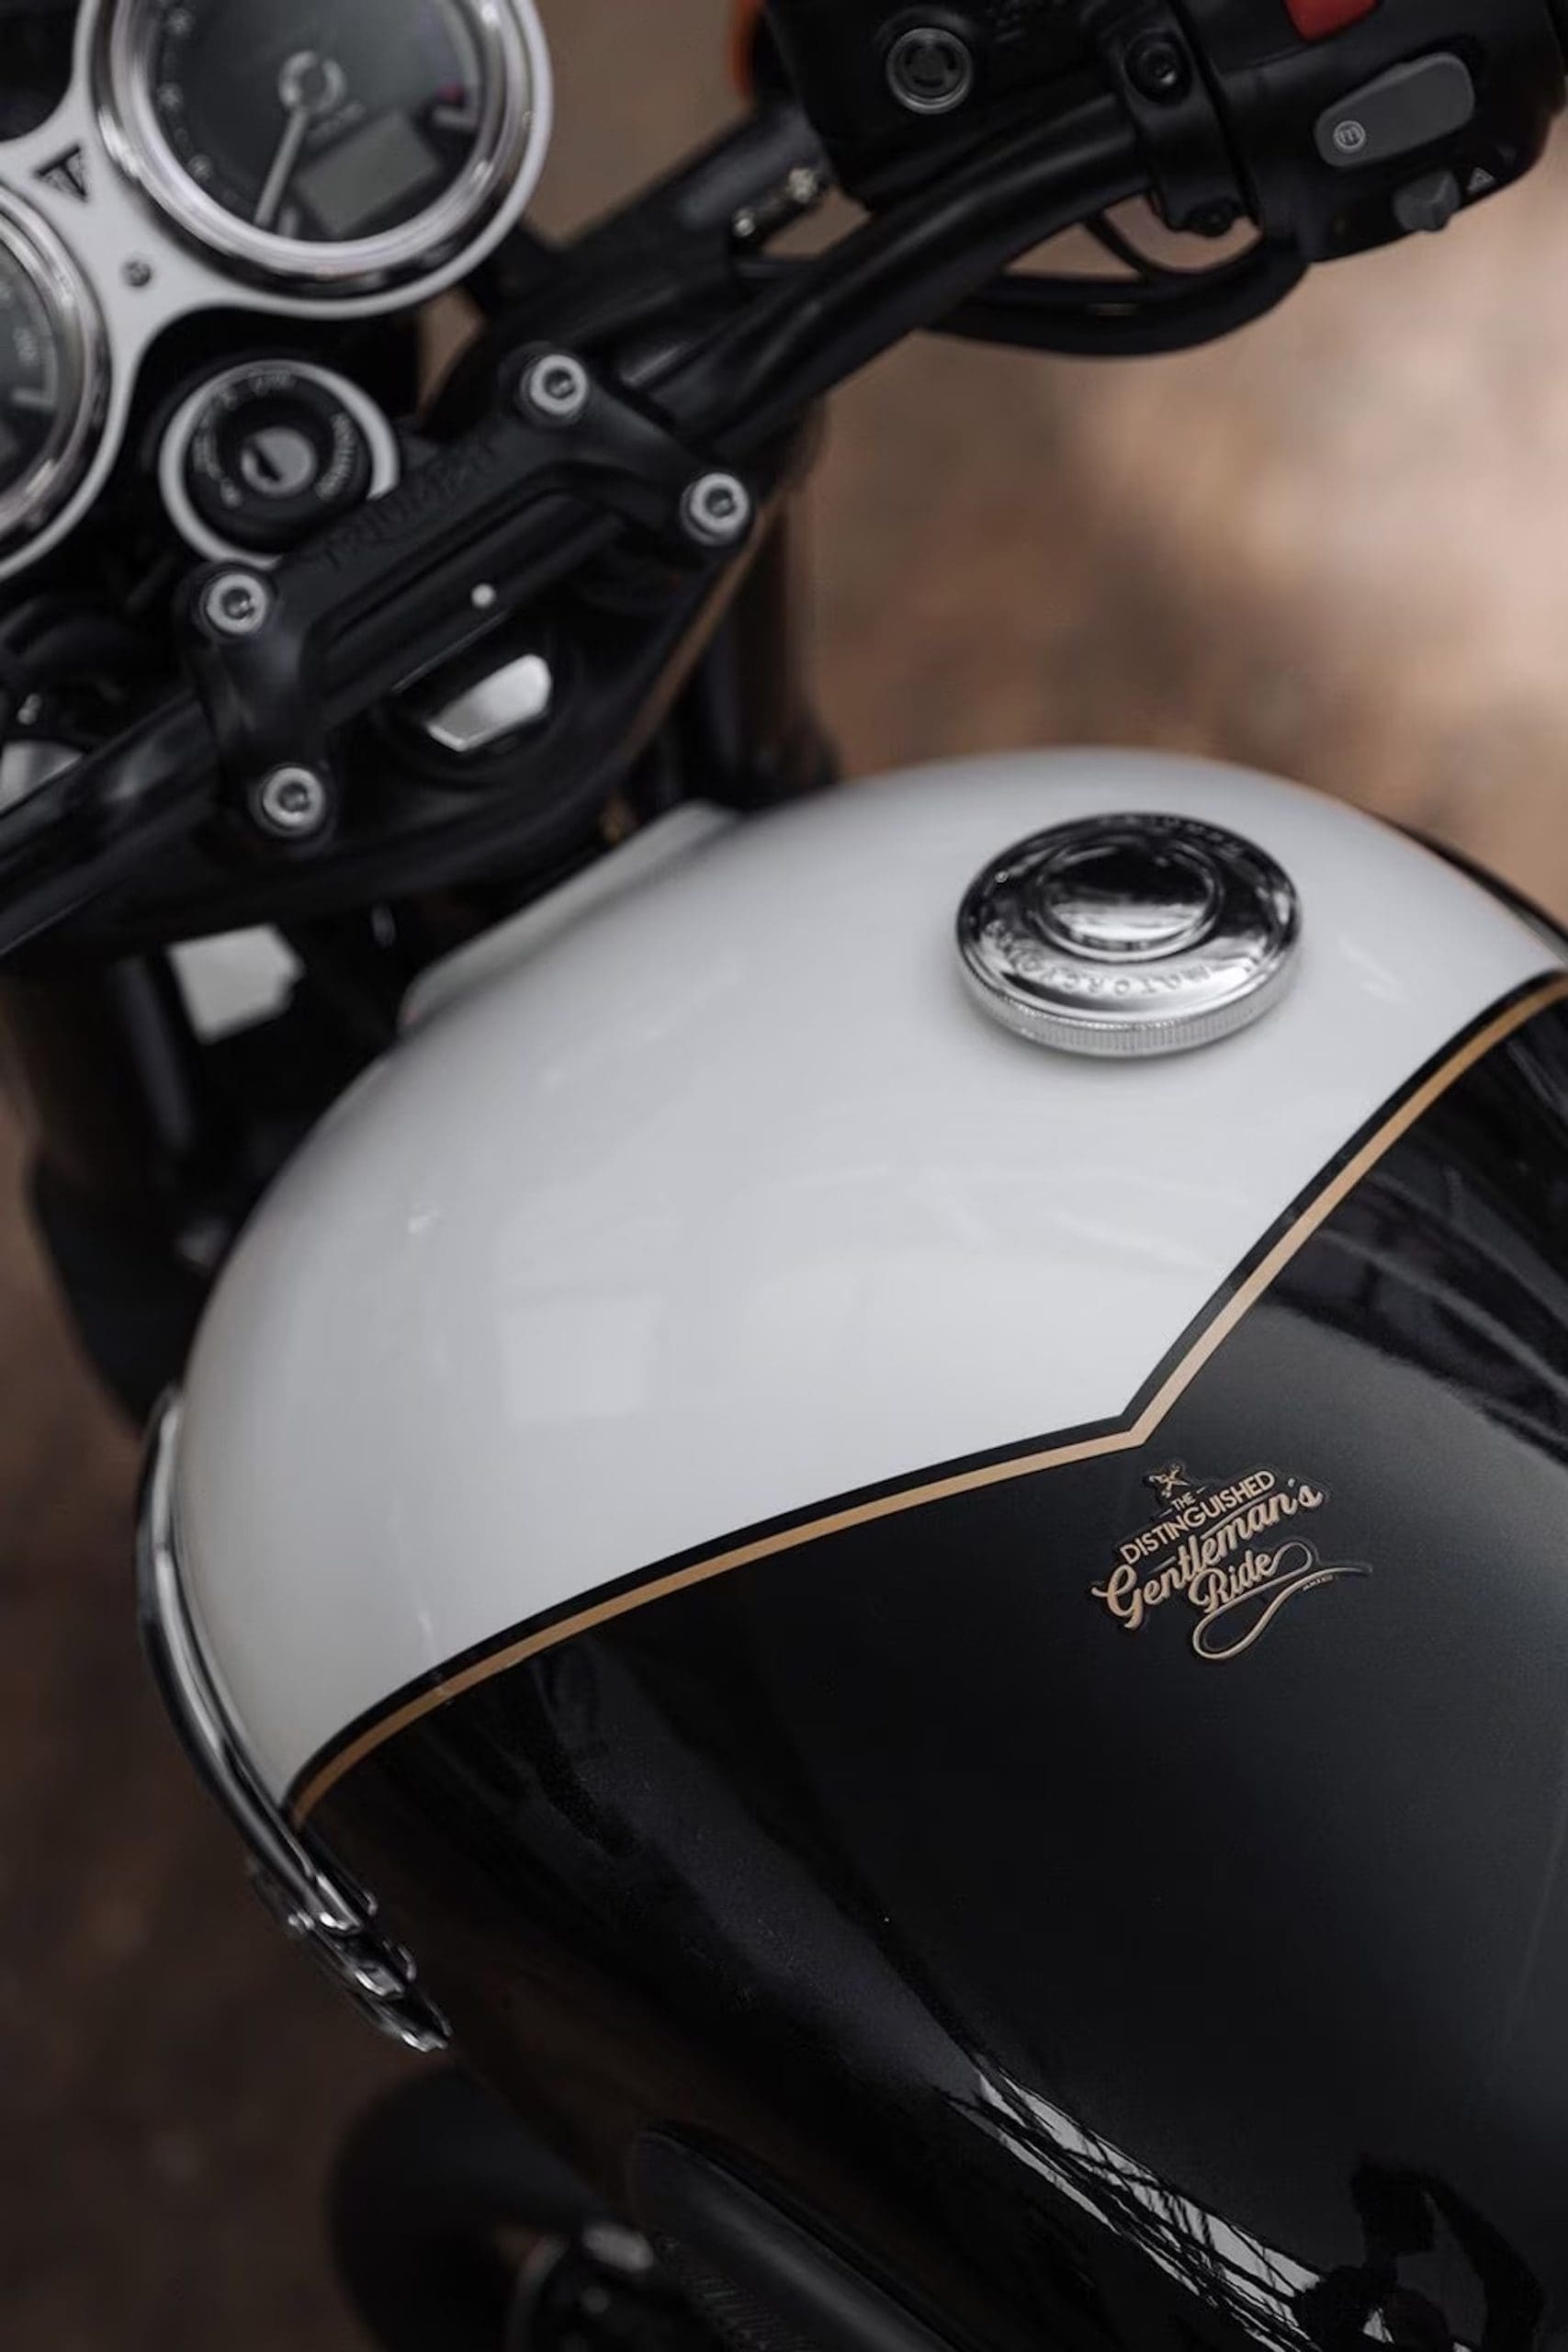 Triumph's new limited edition T120: The Bonneville T120 Black Distinguished Gentleman’s Ride Limited Edition motorcycle. Media sourced from CycleWorld.